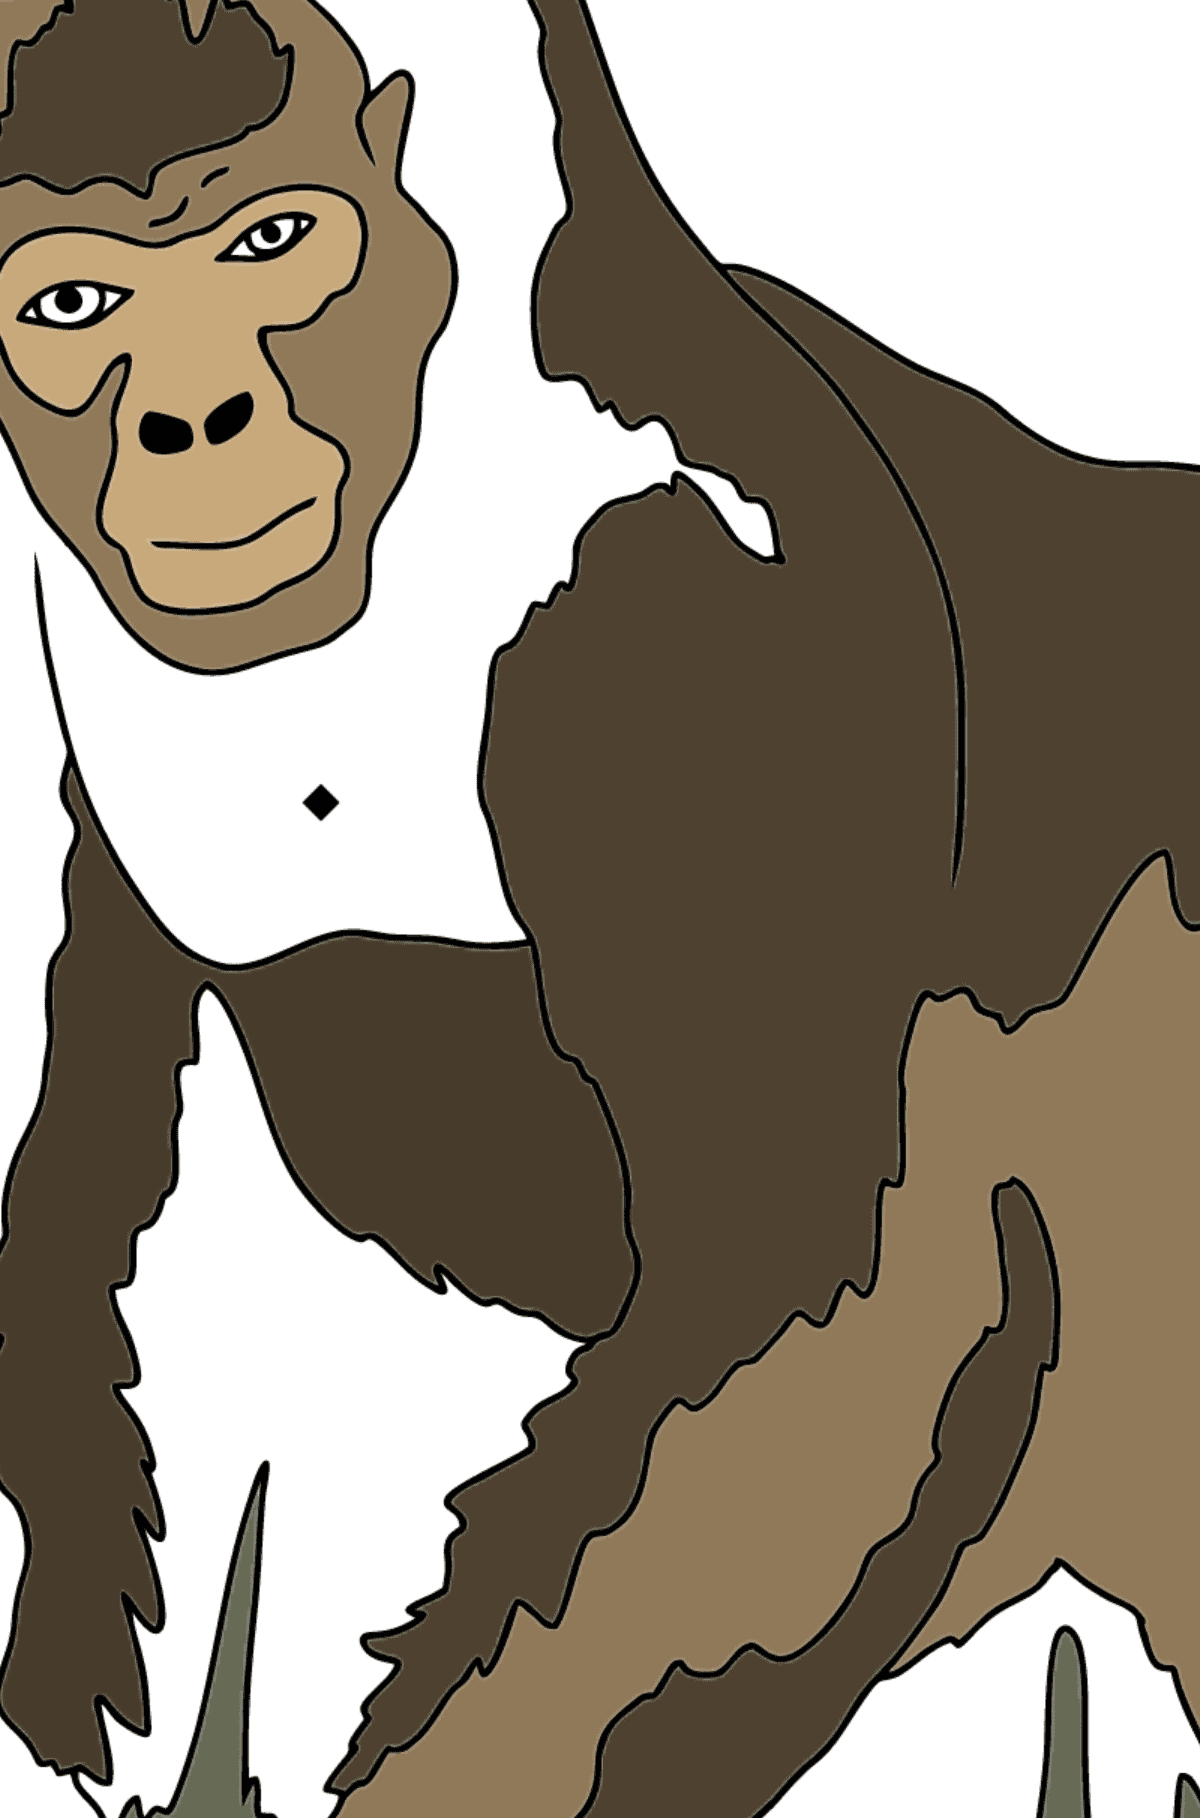 Coloring Page - A Real Gorilla - Coloring by Symbols for Children